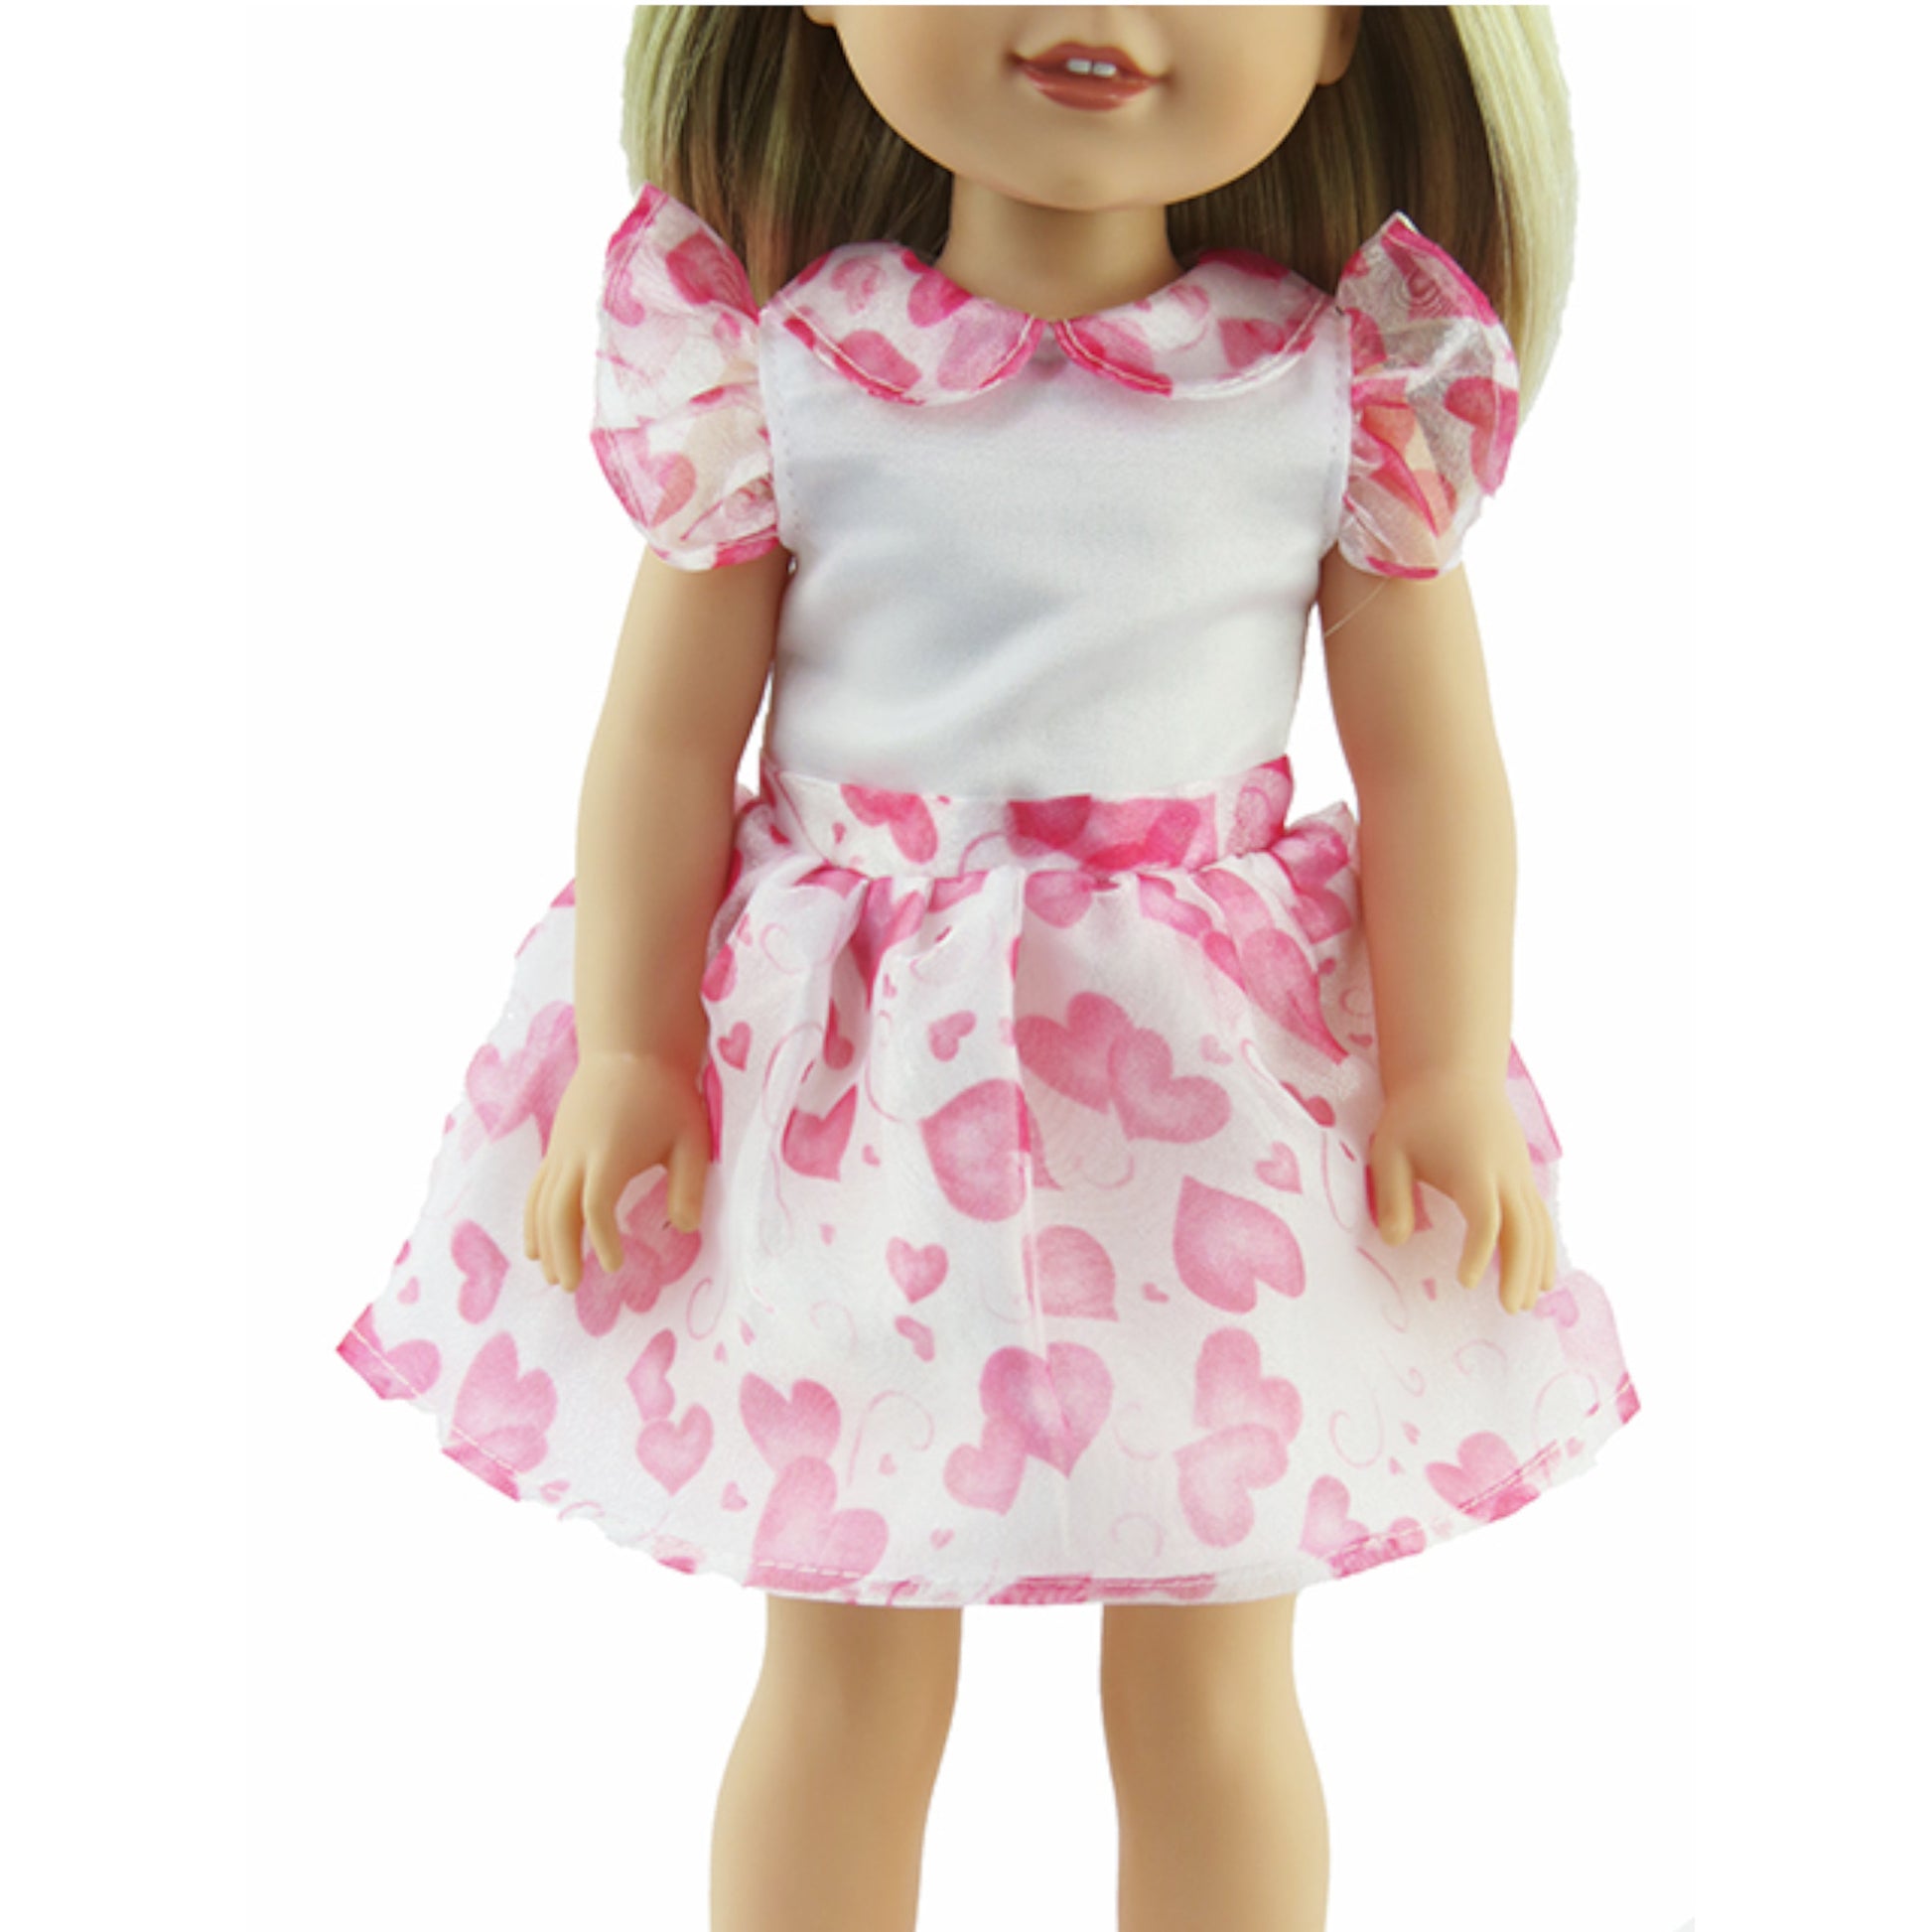 Pink Hearts Organza Dress for 14 1/2-inch dolls Up Close